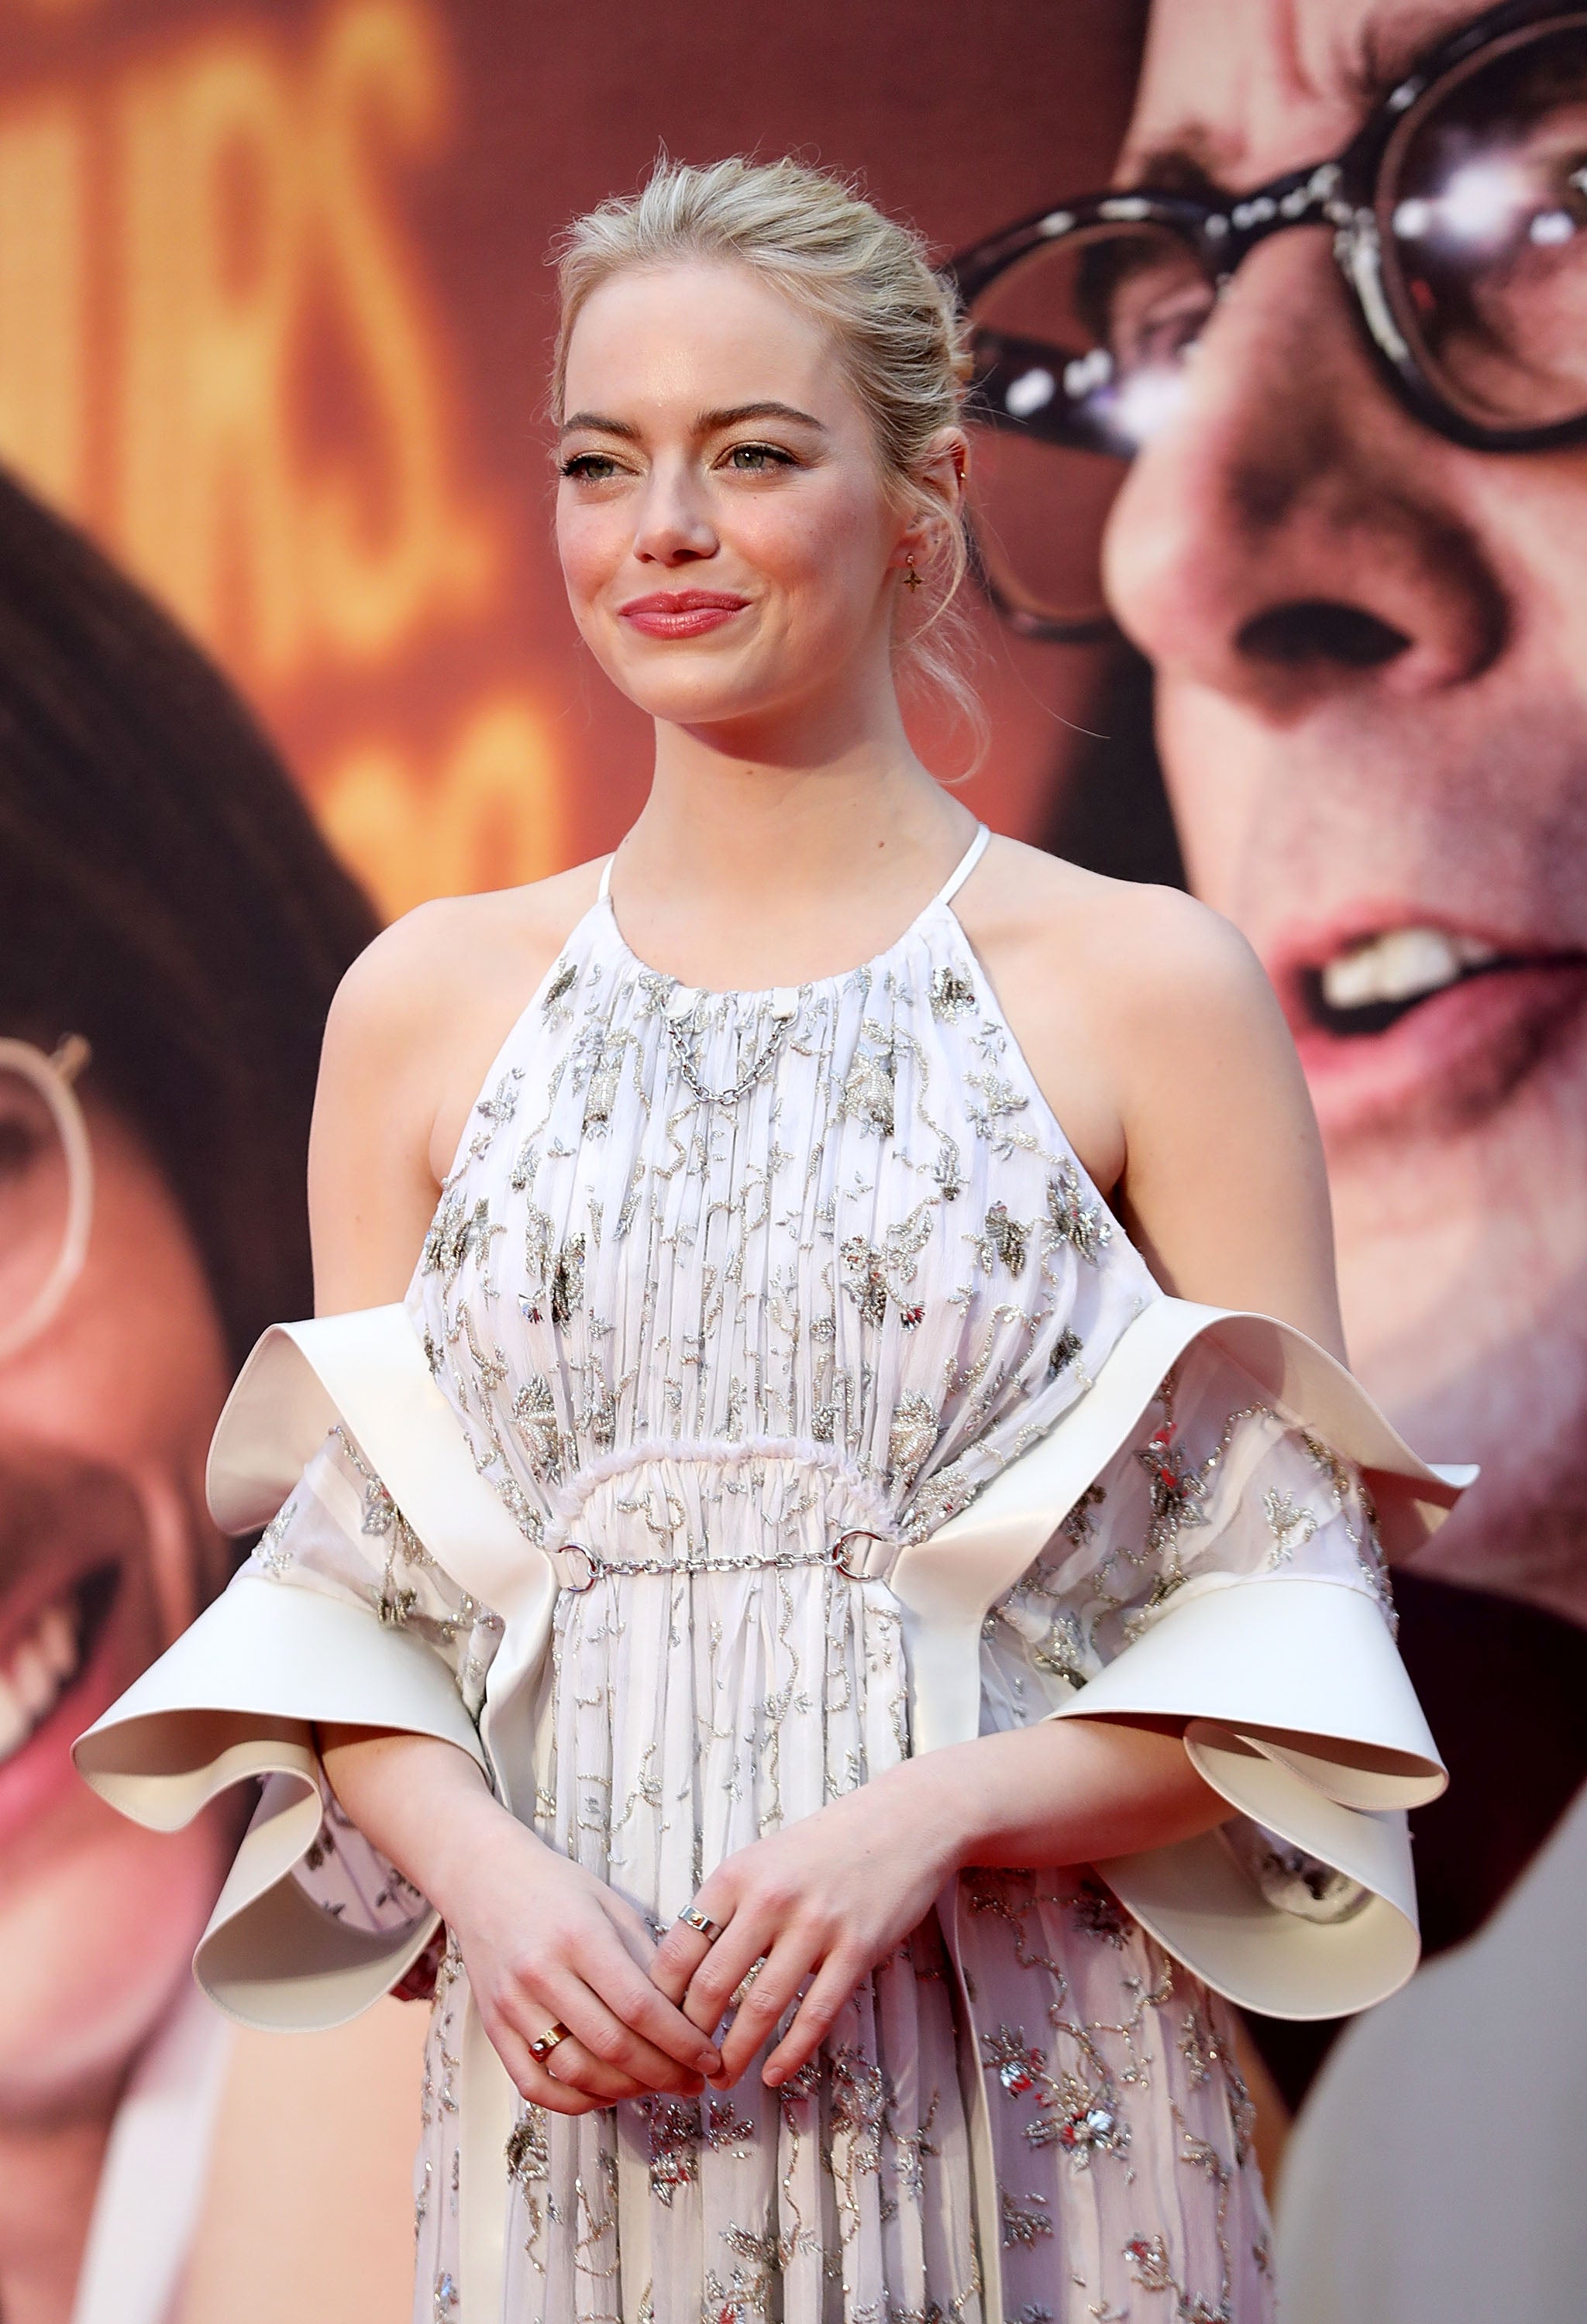 Emma Stone Dazzles in Whimsical Gown at 'Battle of the Sexes' European  Premiere